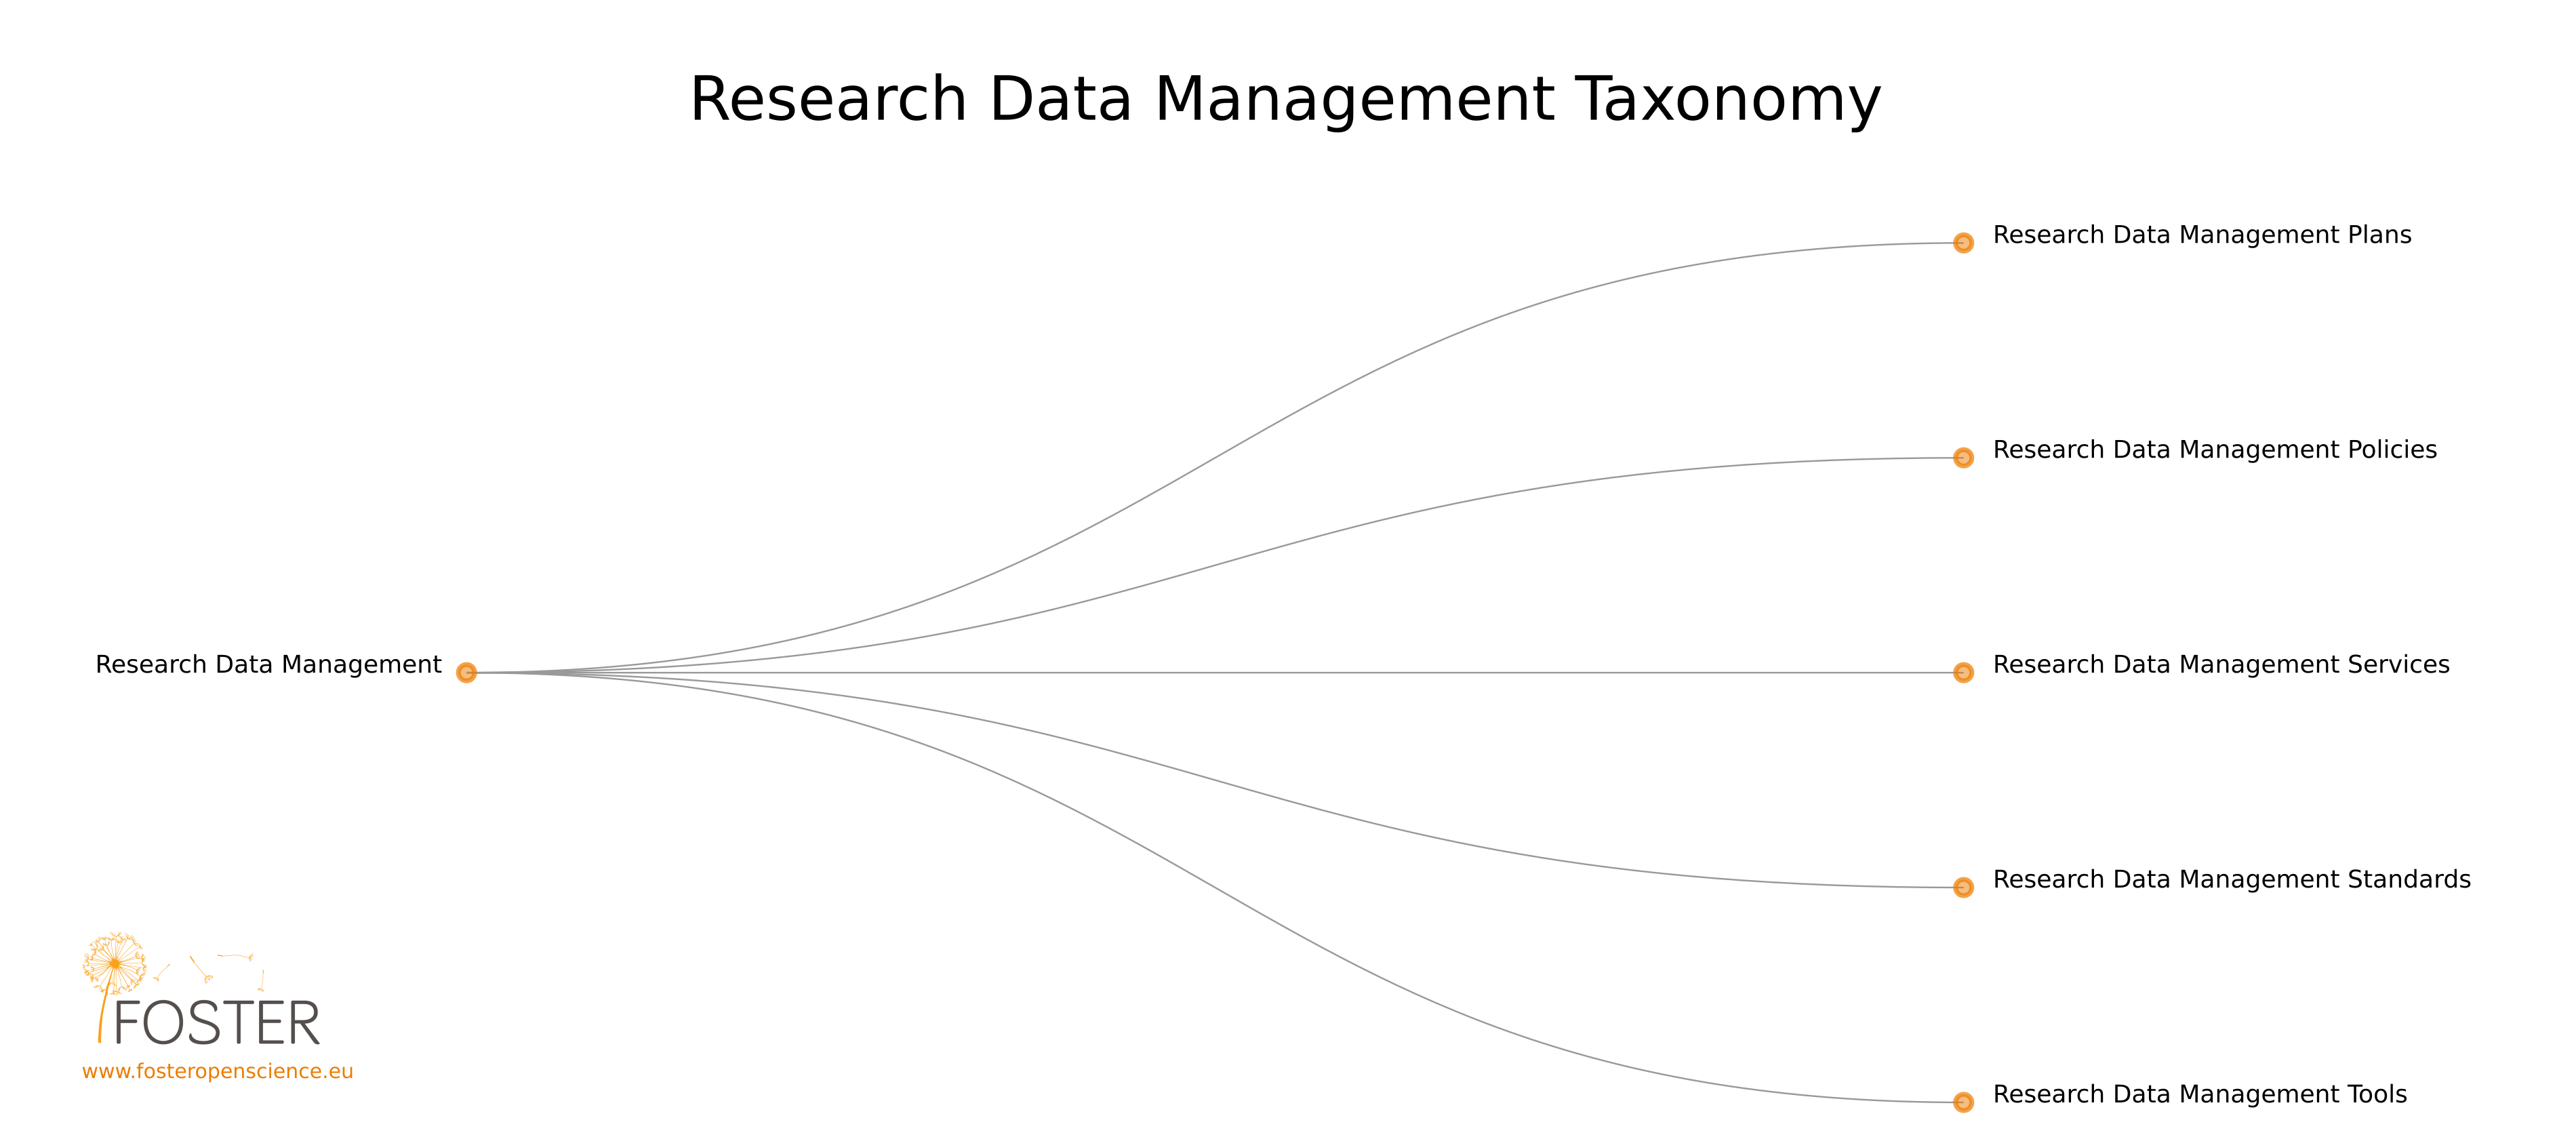 RDM Taxonomy - FOSTER Project